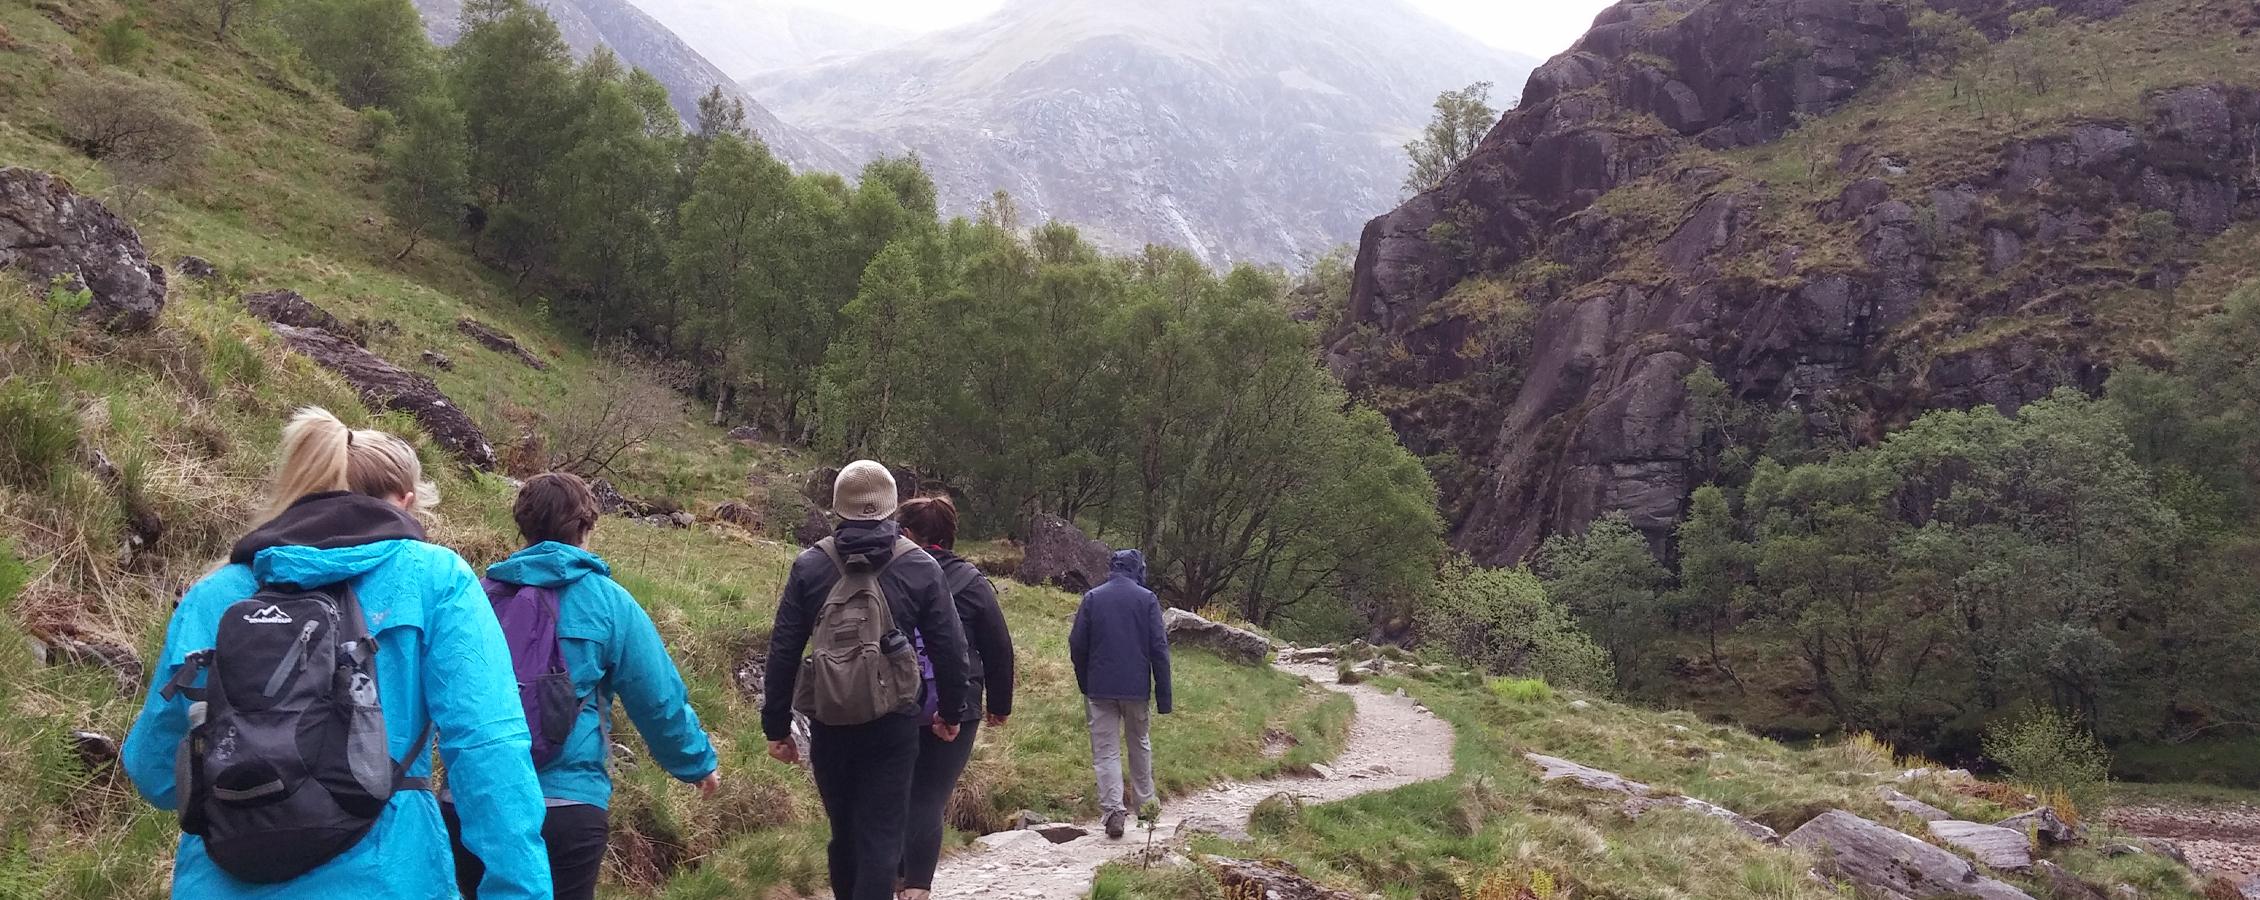 A group of people hike on a worn path amidst mountains and clouds.